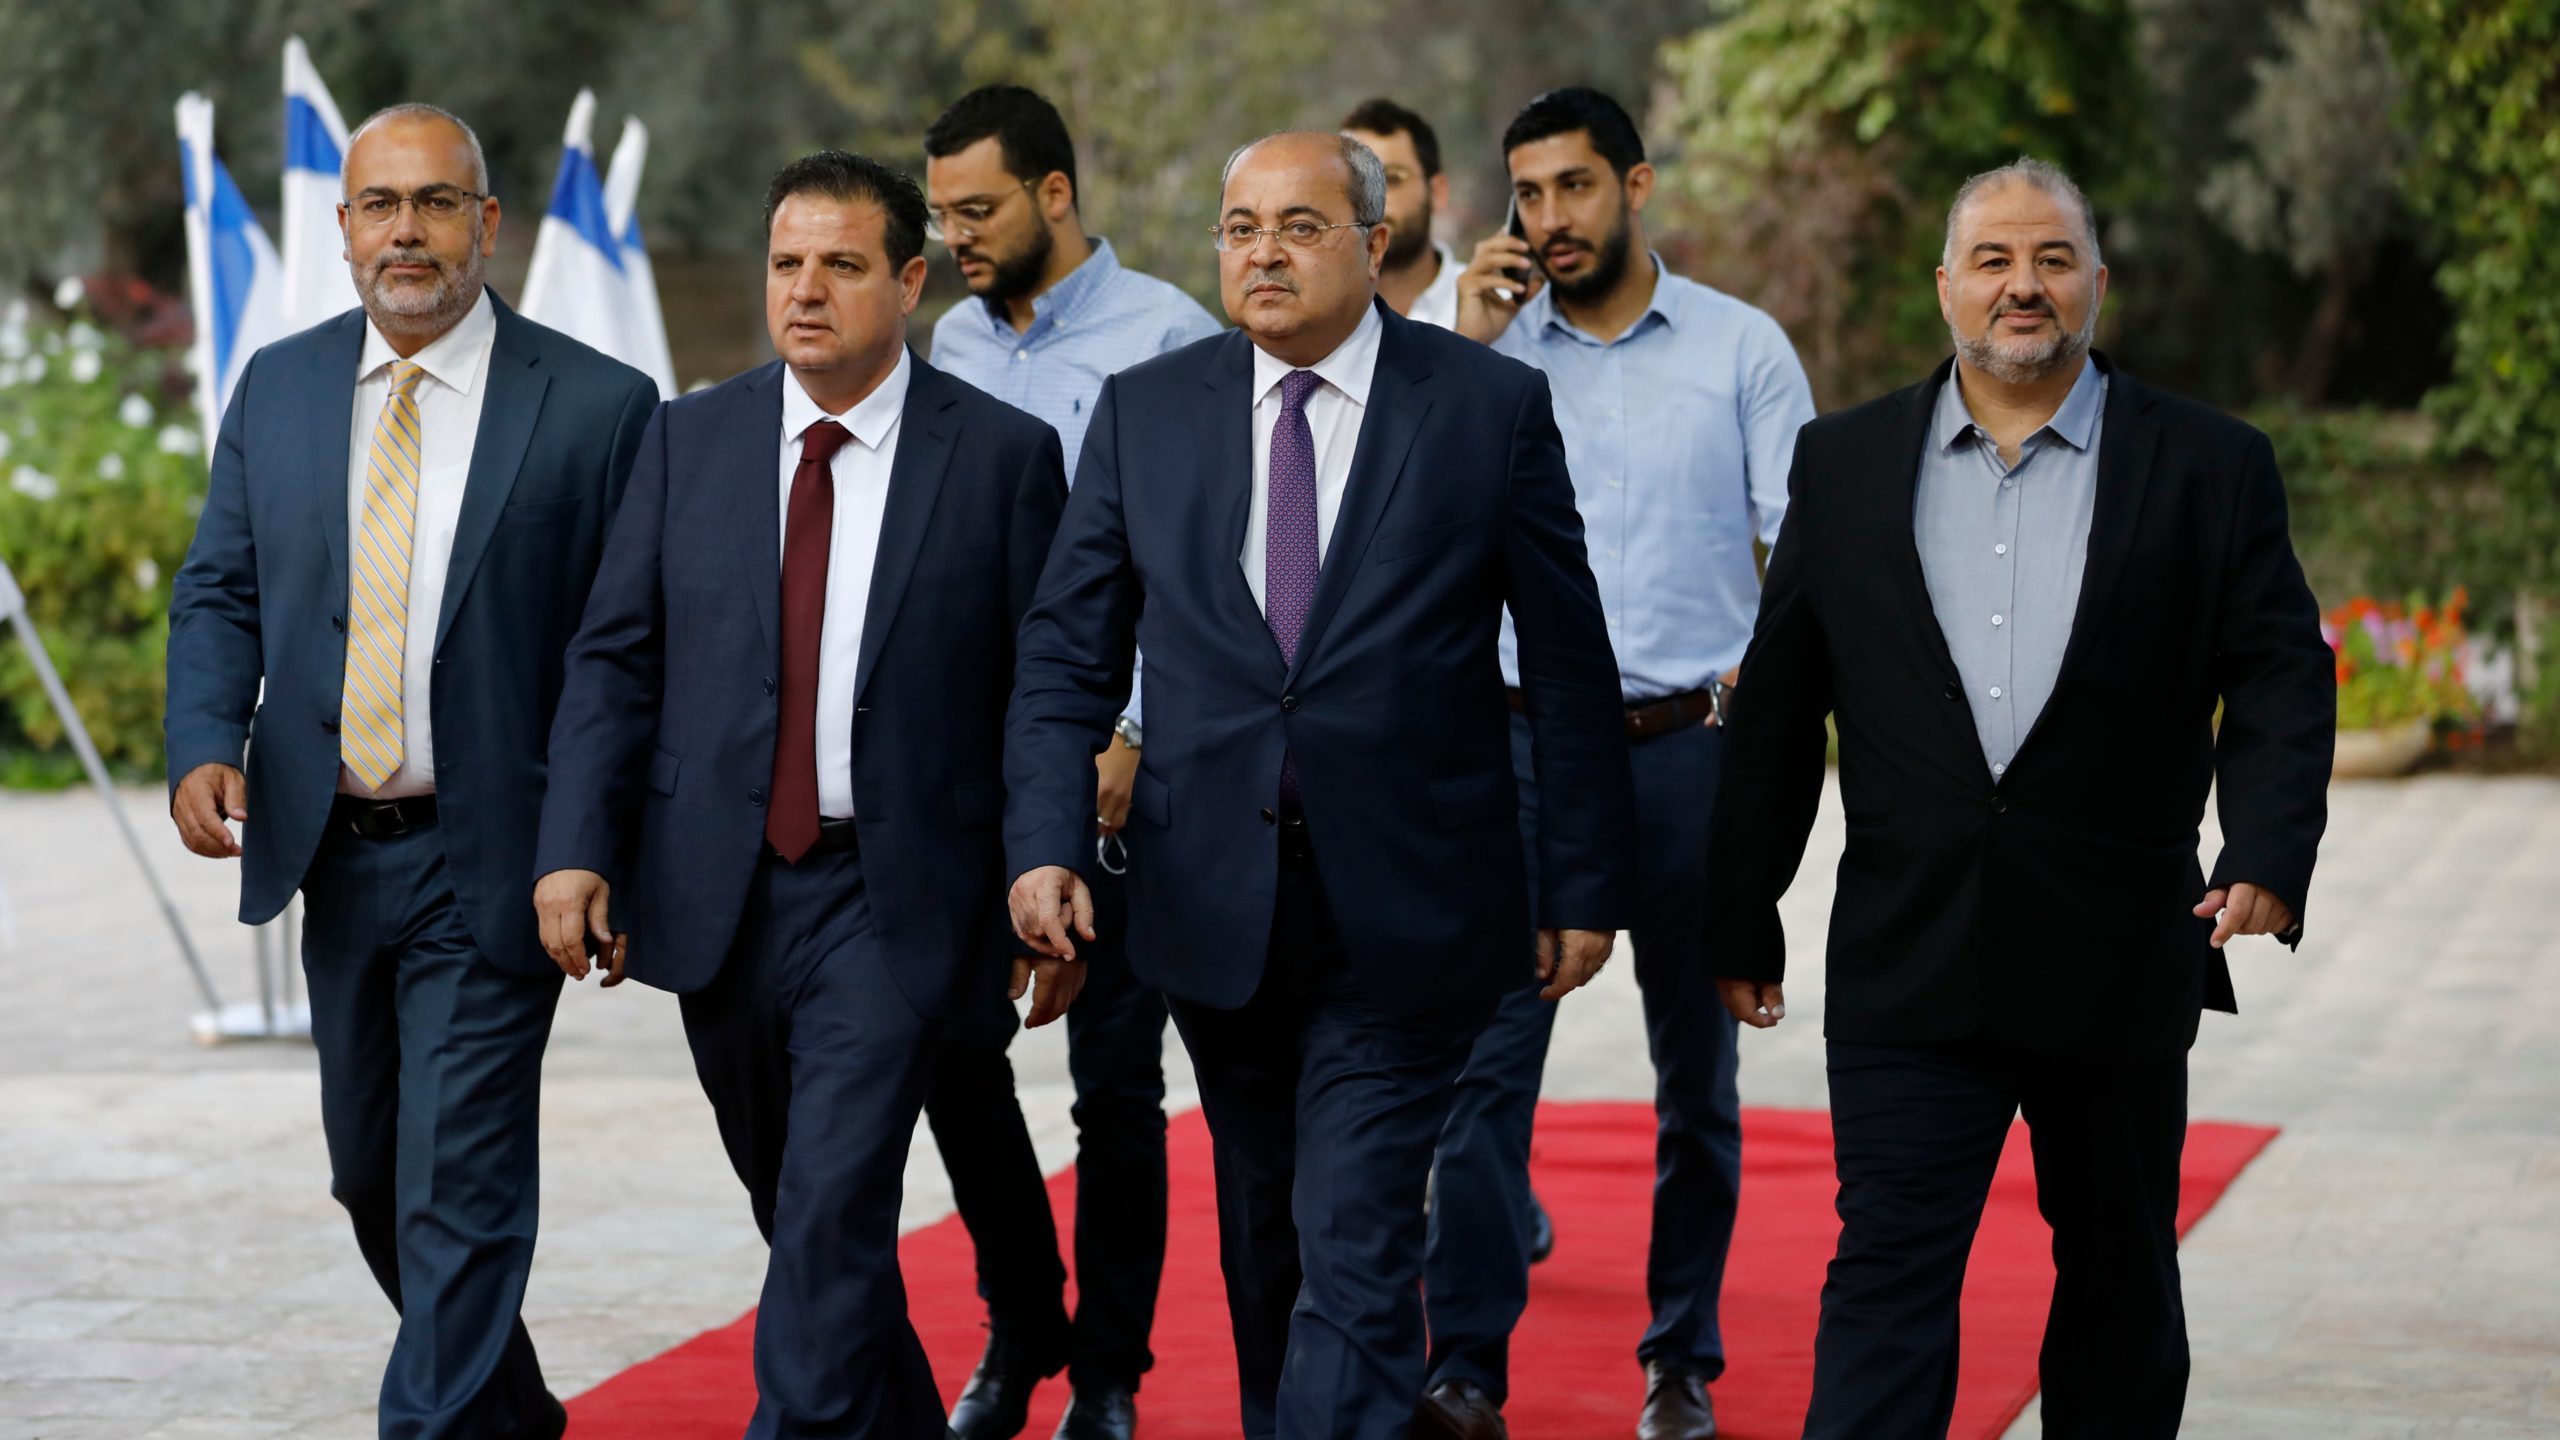 Anger Over Trump Plan Could Benefit Arab-majority Joint List in Israeli Election